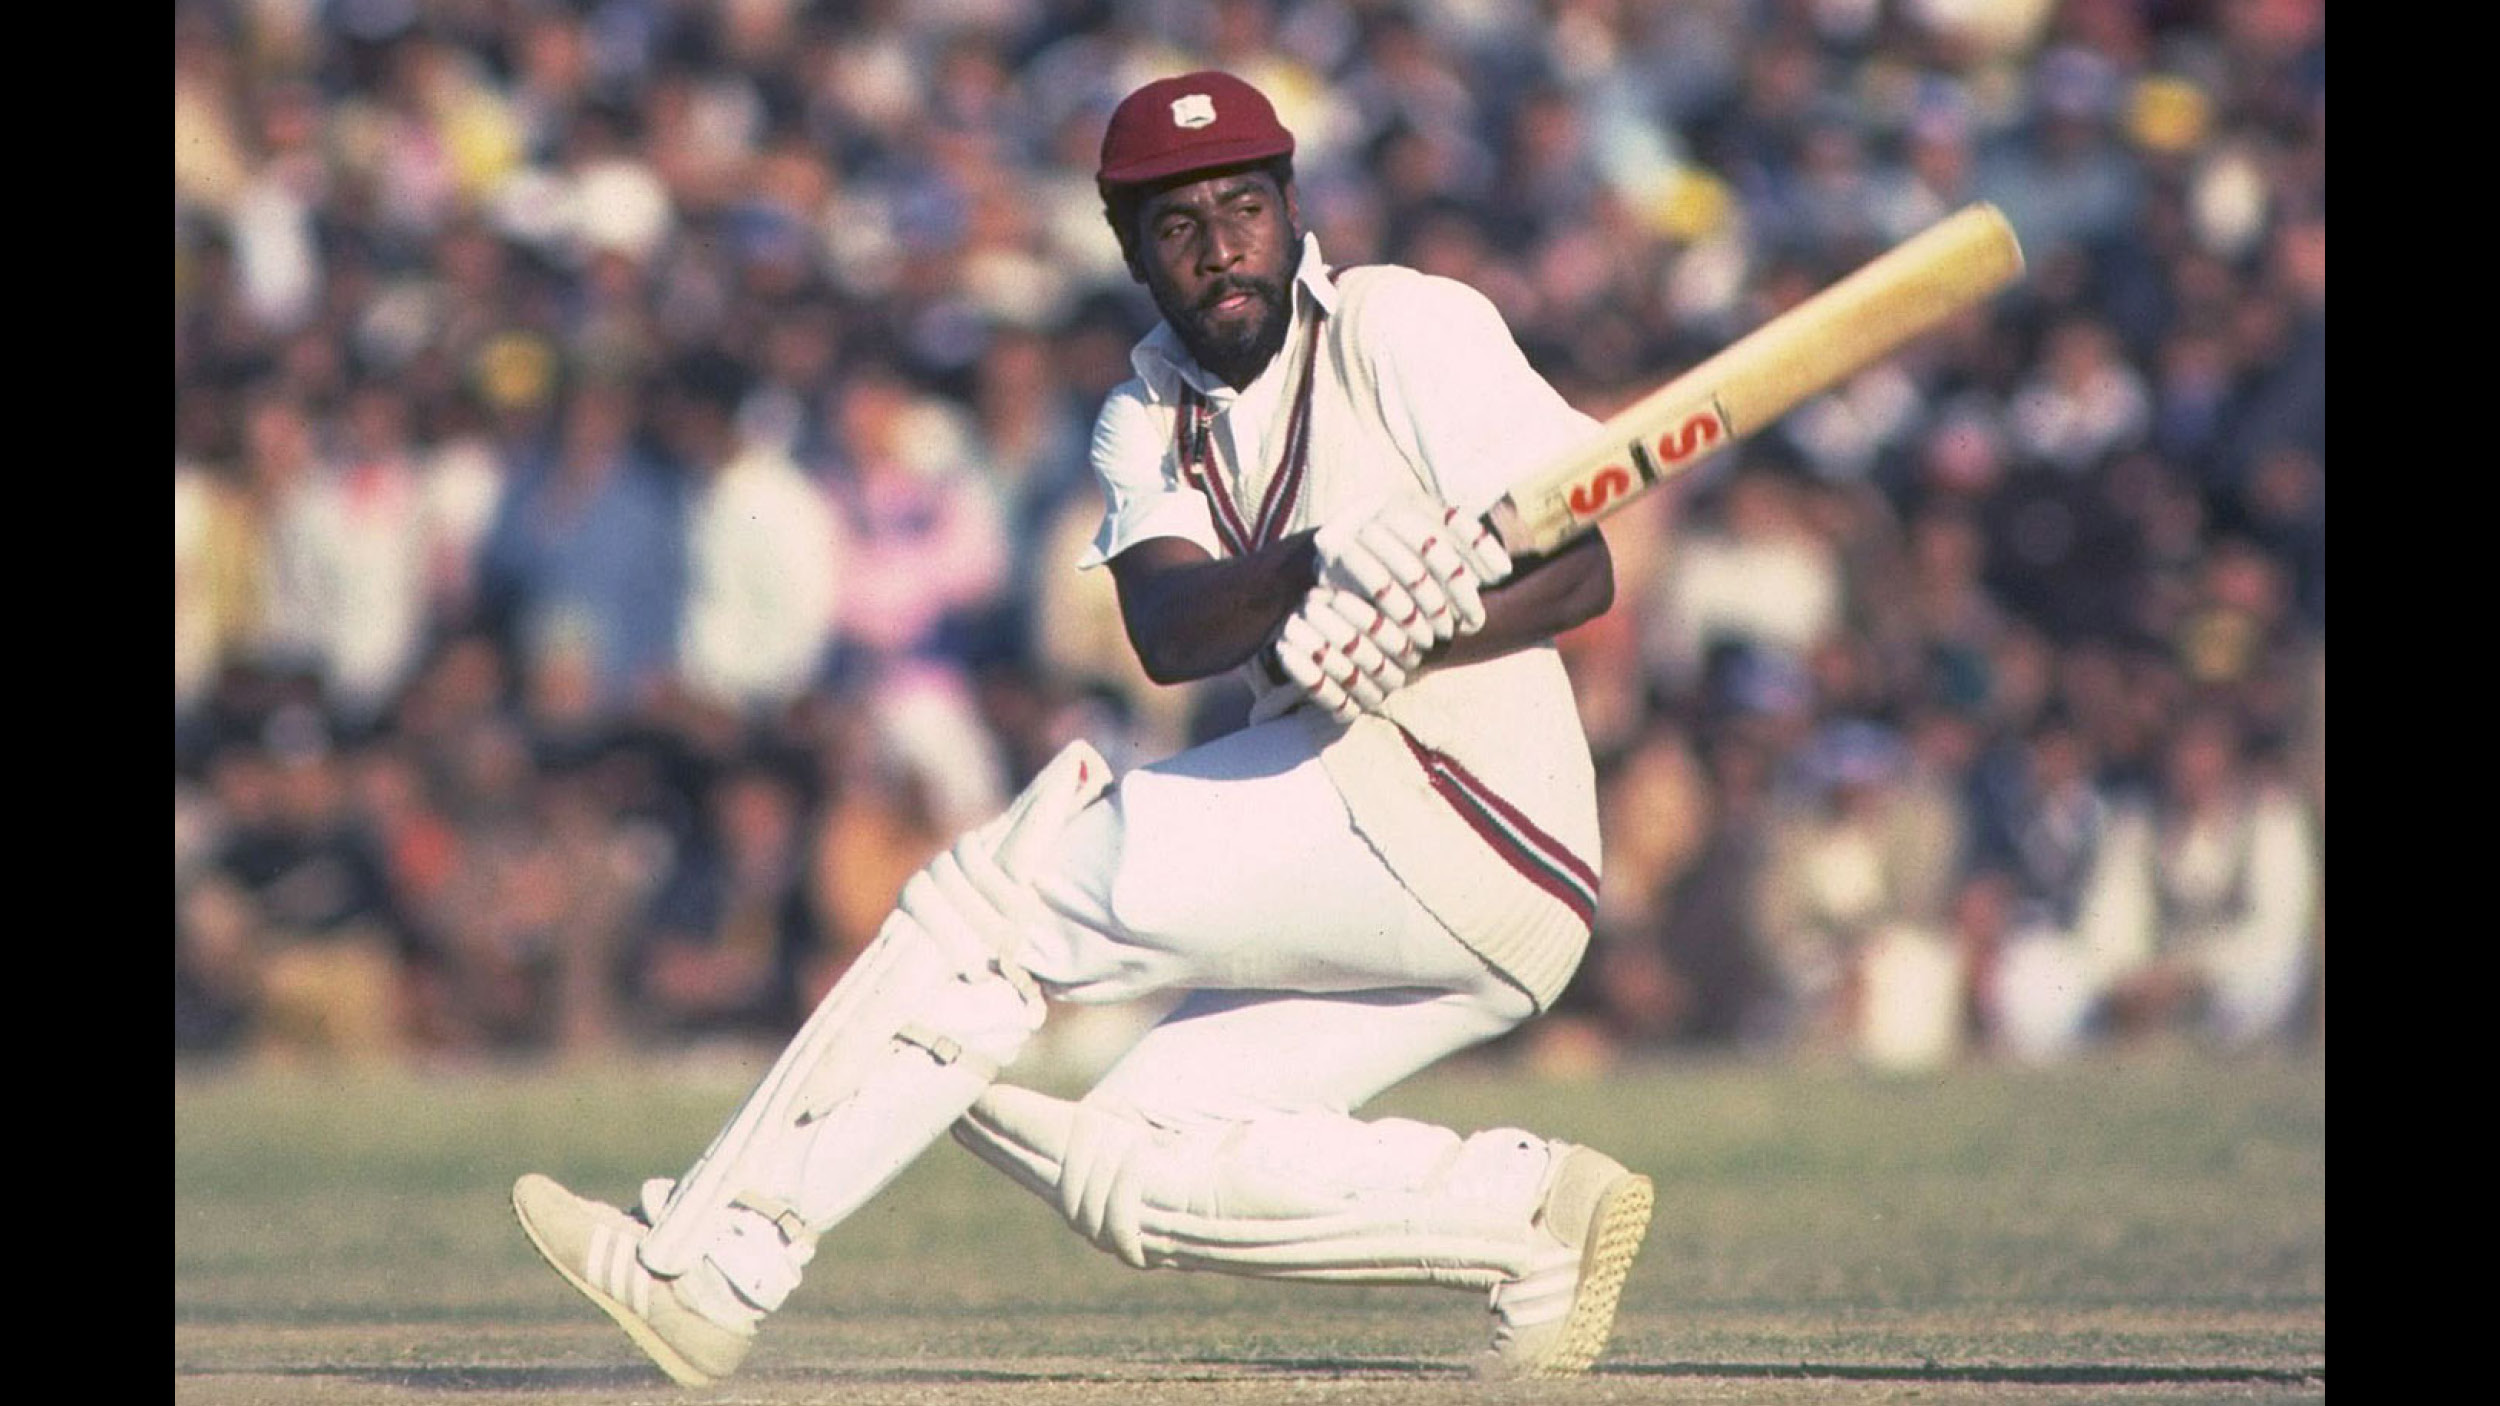 I hold nothing against anyone: Legendary batsman Sir Viv Richards says he  holds no malice against rebel tour players - Antigua Observer Newspaper